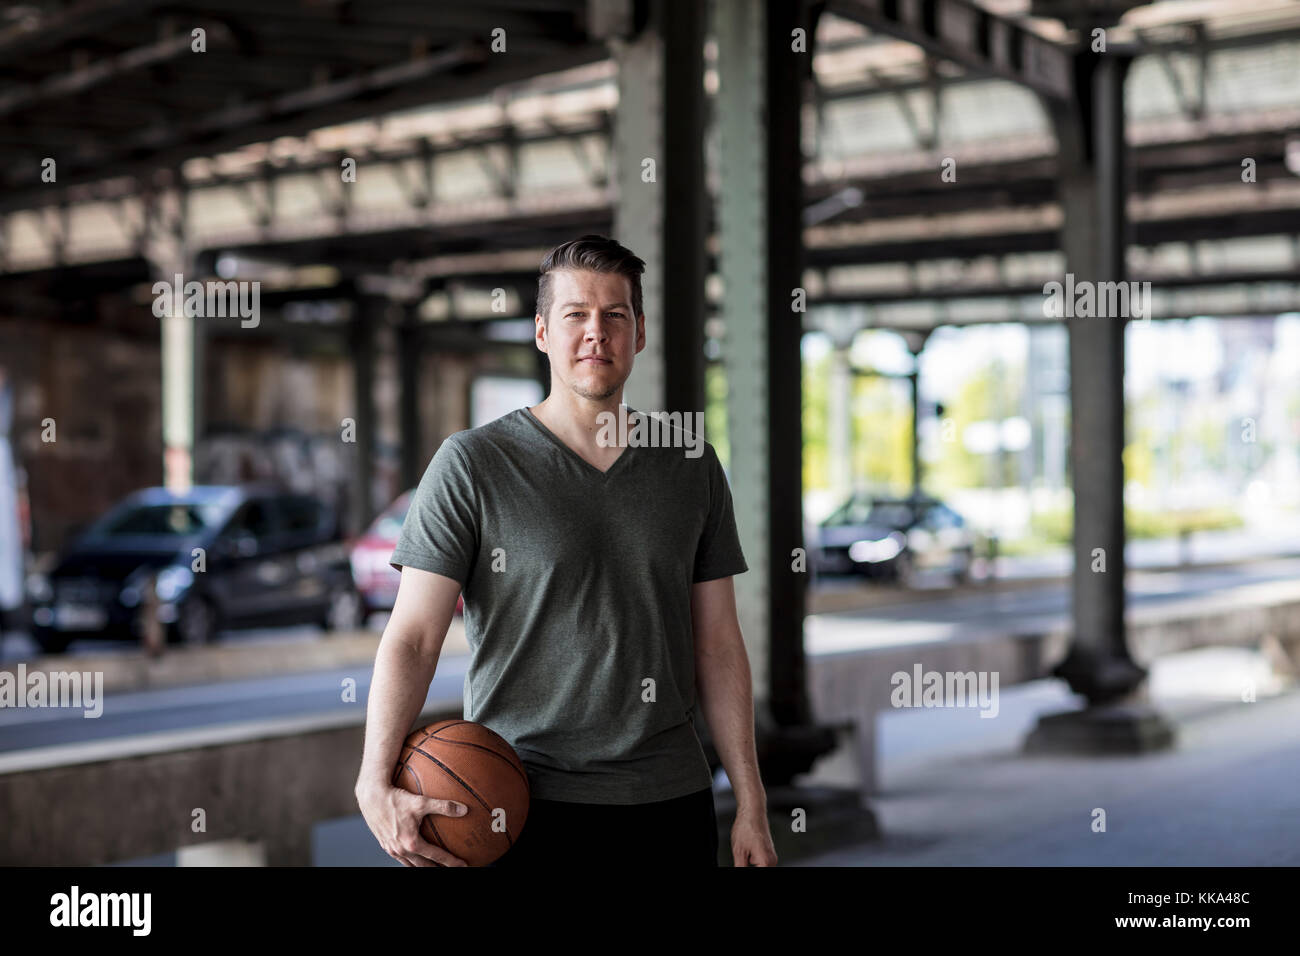 Man with a basketball standing under a city bridge. Stock Photo